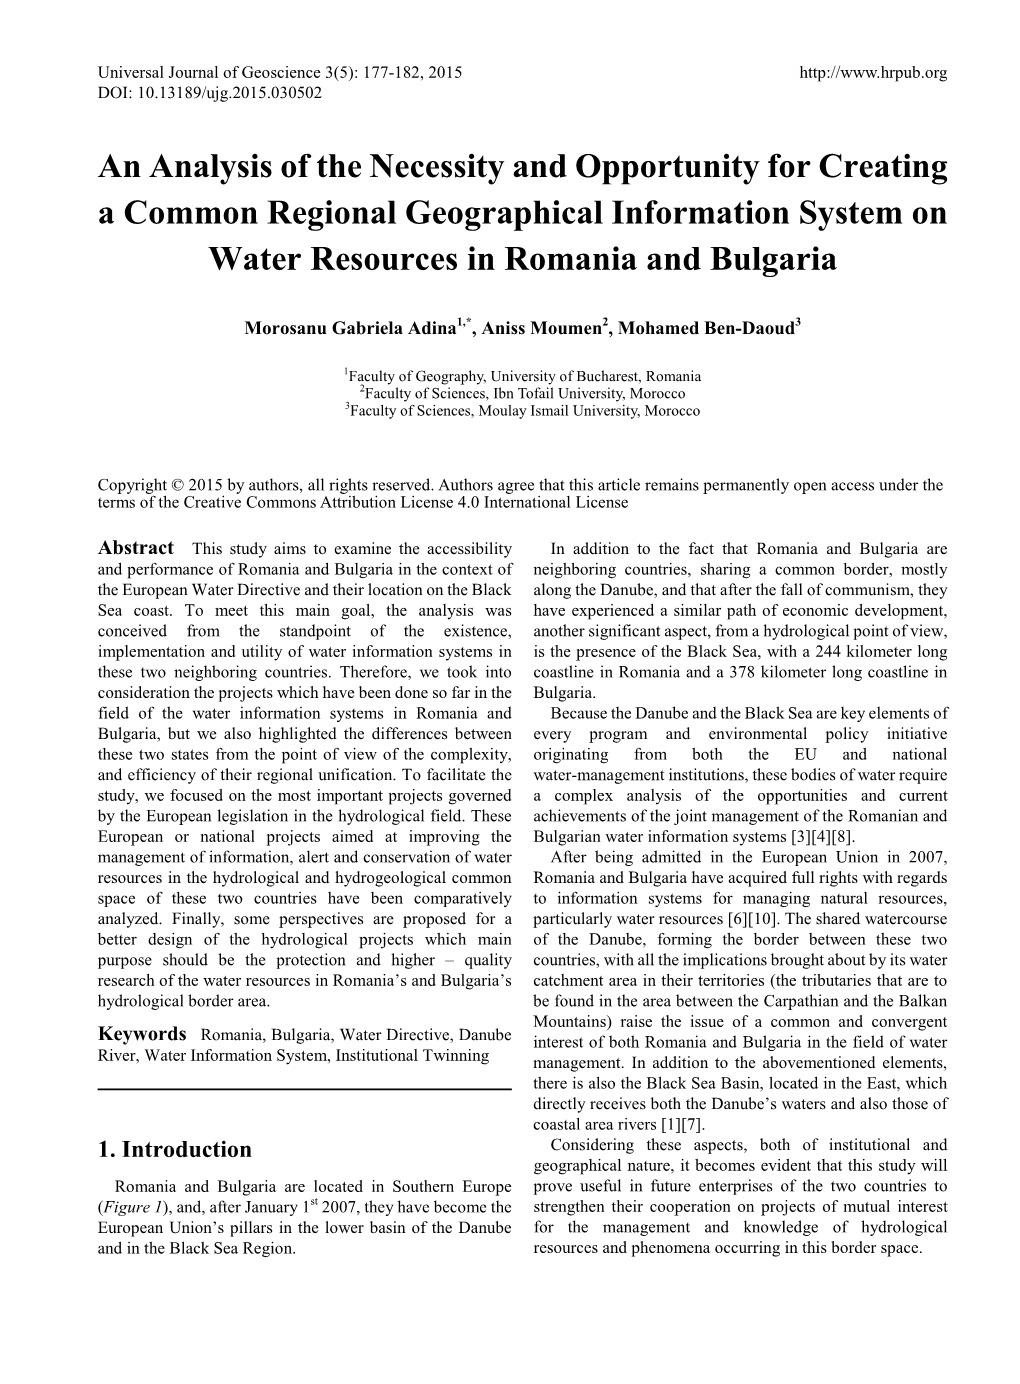 An Analysis of the Necessity and Opportunity for Creating a Common Regional Geographical Information System on Water Resources in Romania and Bulgaria